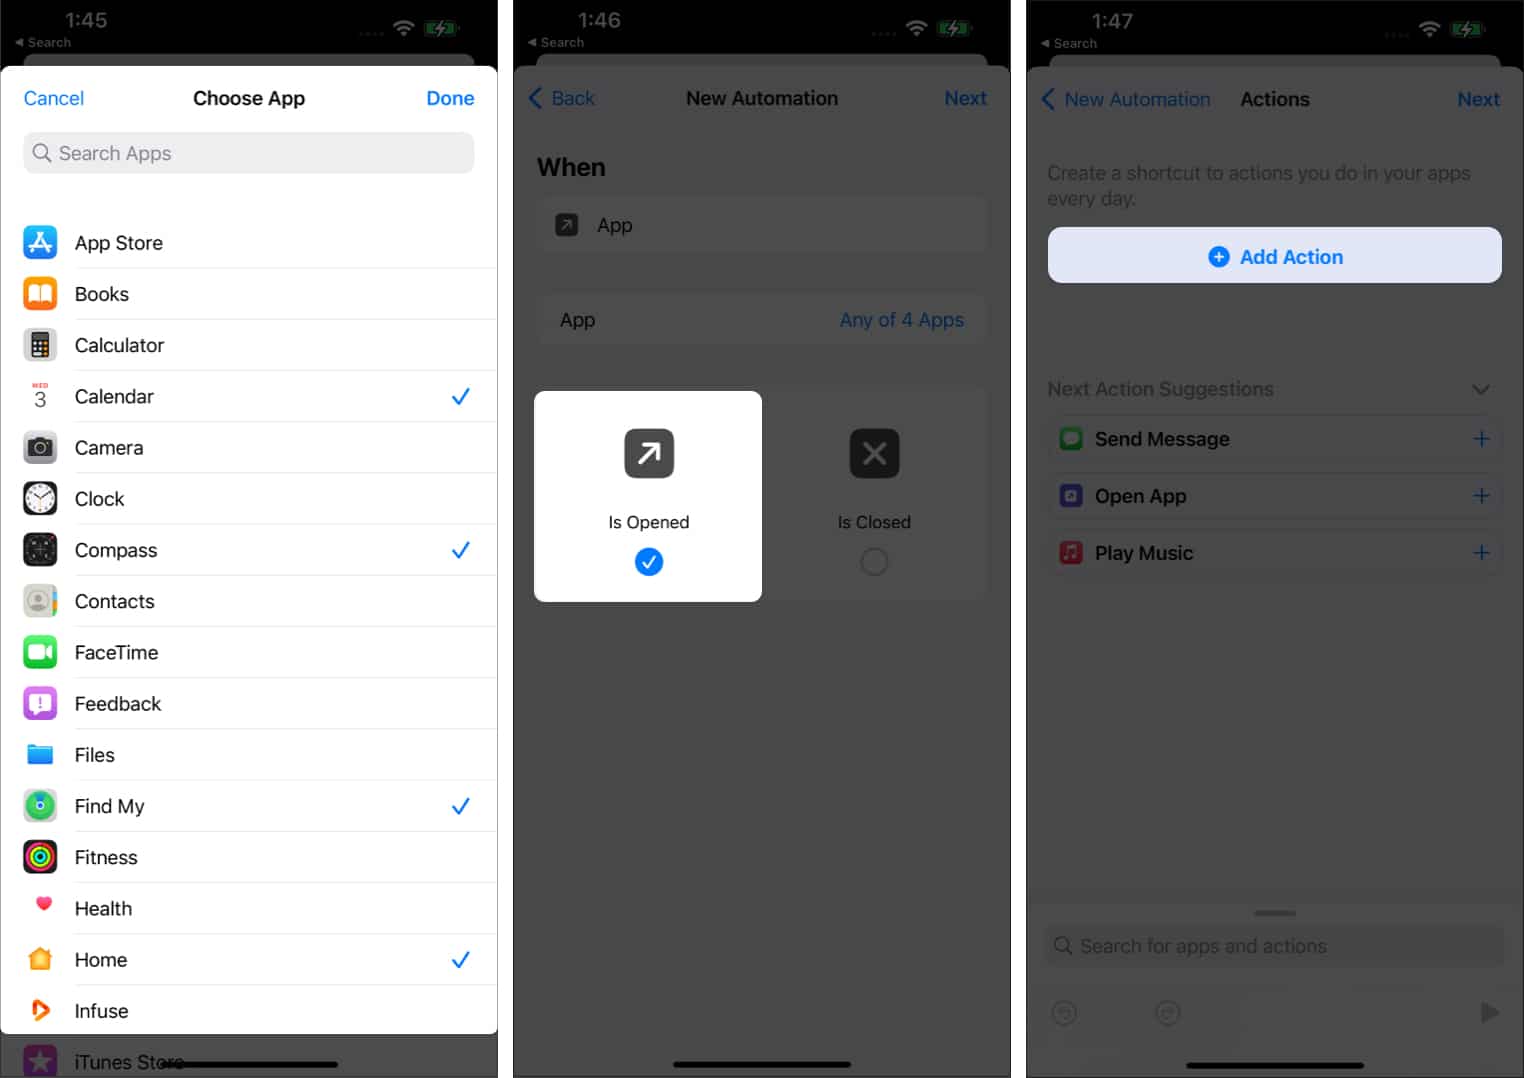 Select Add Action in the Shortcuts app on iPhone